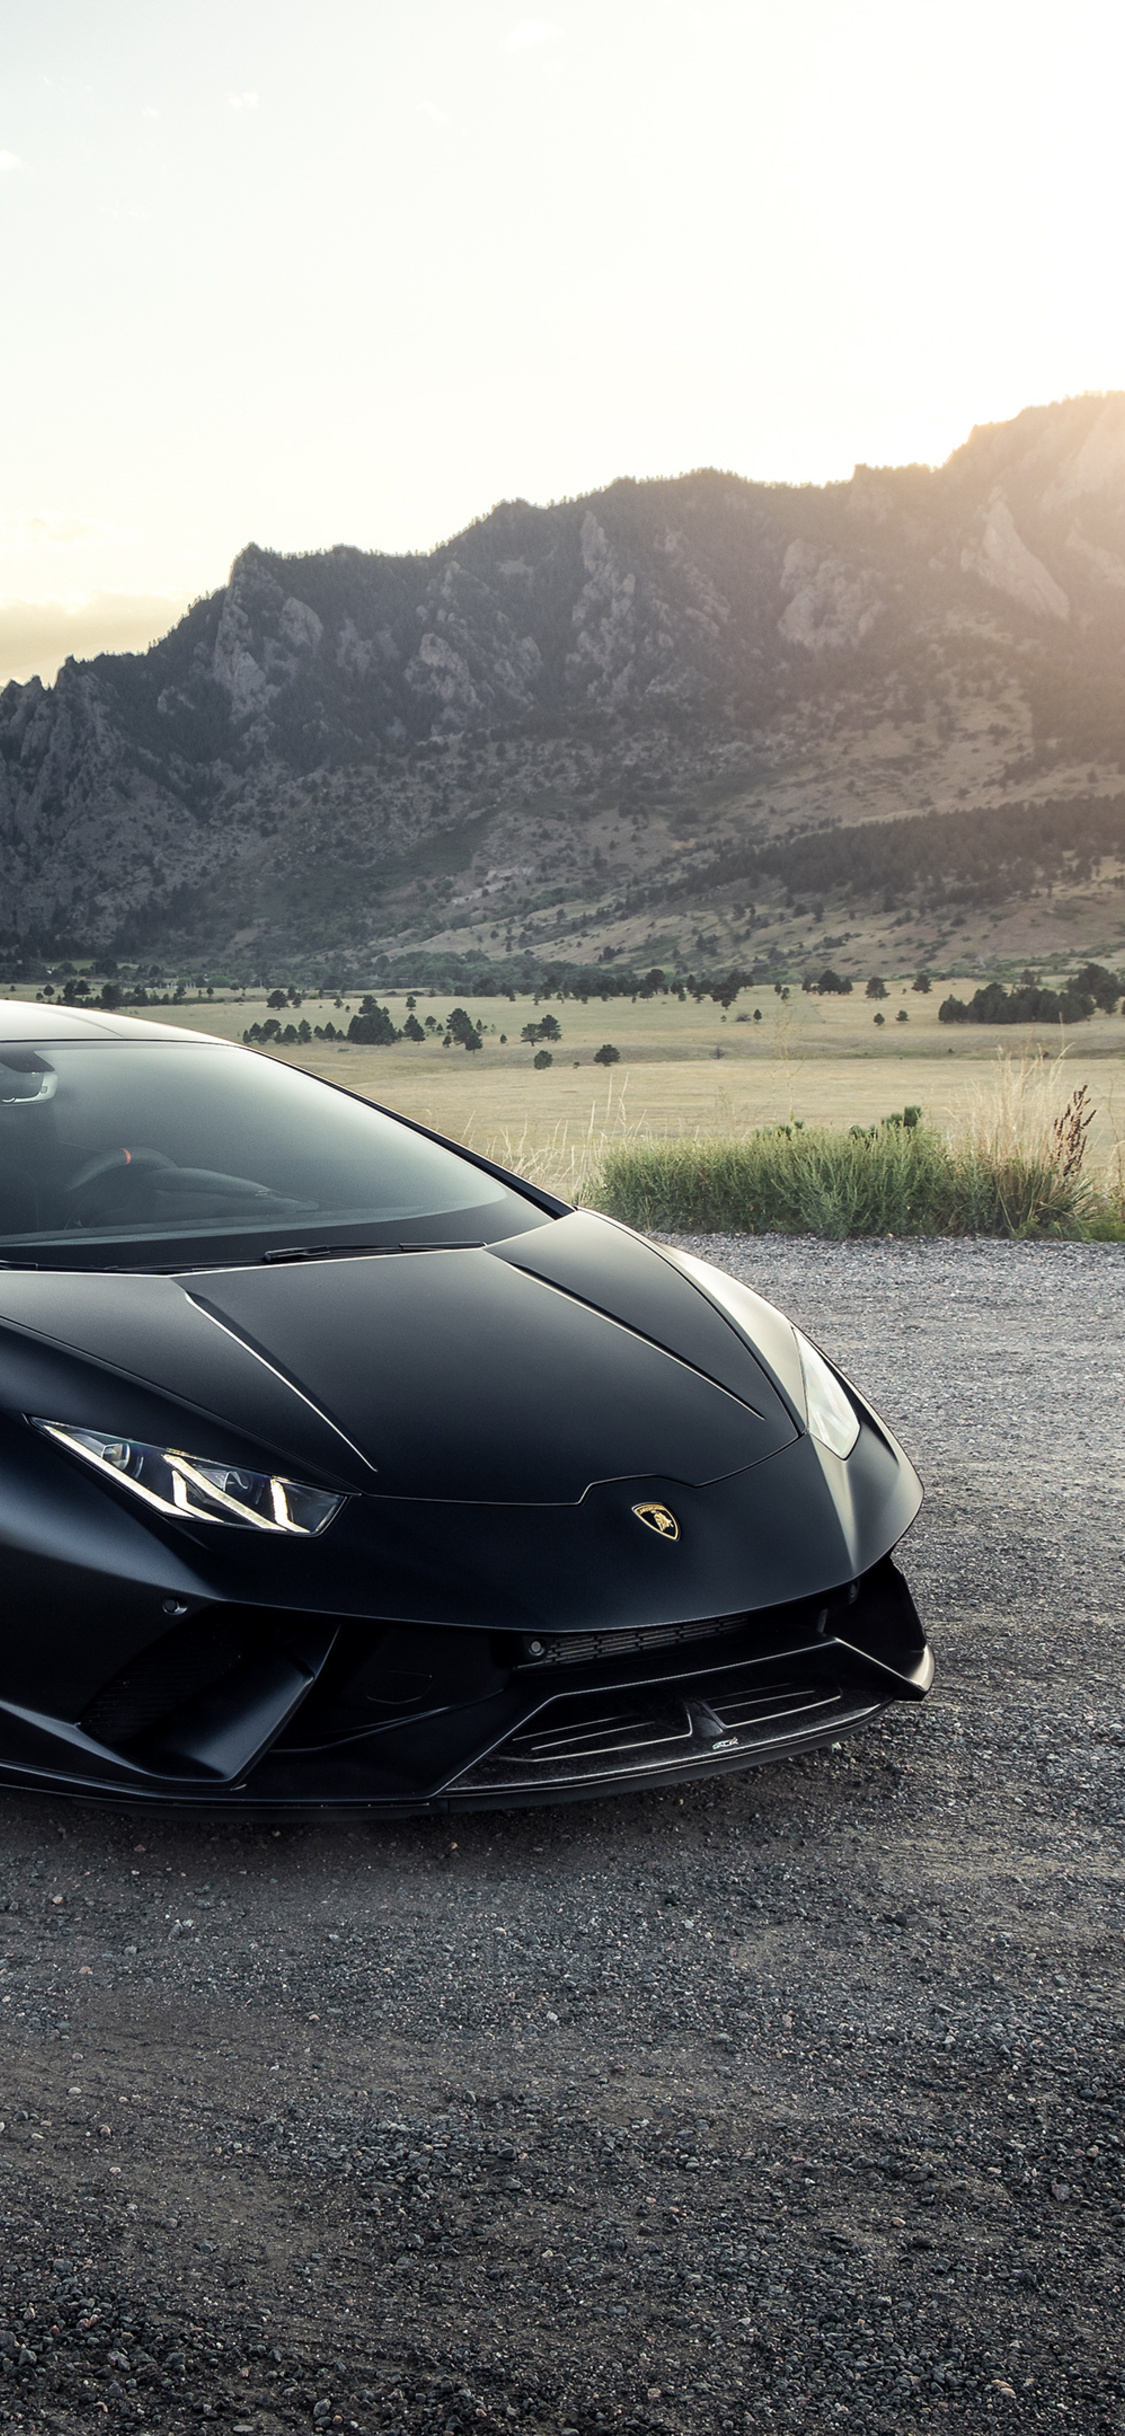 X black lamborghini huracan iphone xsiphone iphone x hd k wallpapers images backgrounds photos and pictures